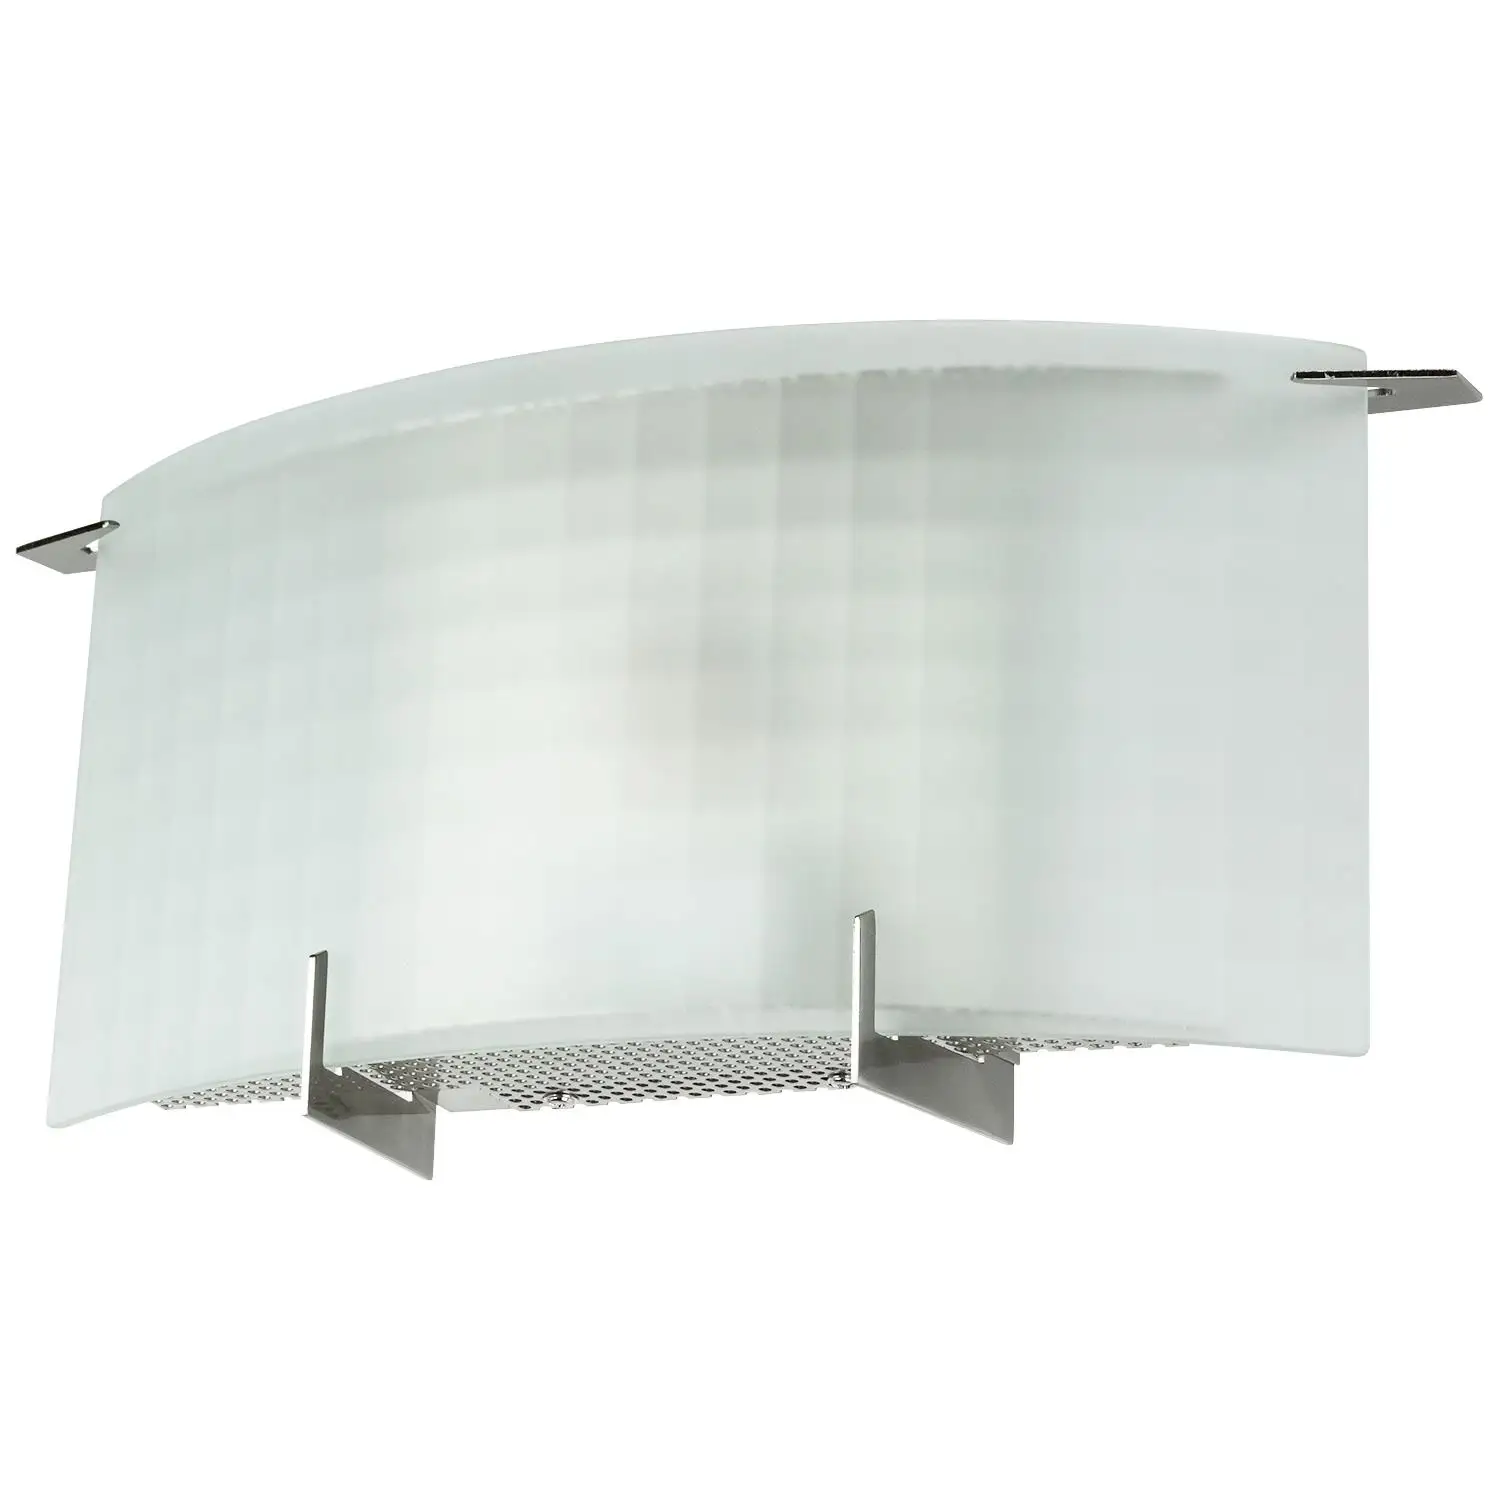 Sunlite LED Curved Glass Wall Sconce Fixture, 9W (60W Equivalent), Dimmable, 500 Lumen, Brushed Nickel Finish, ETL Listed, 4000K